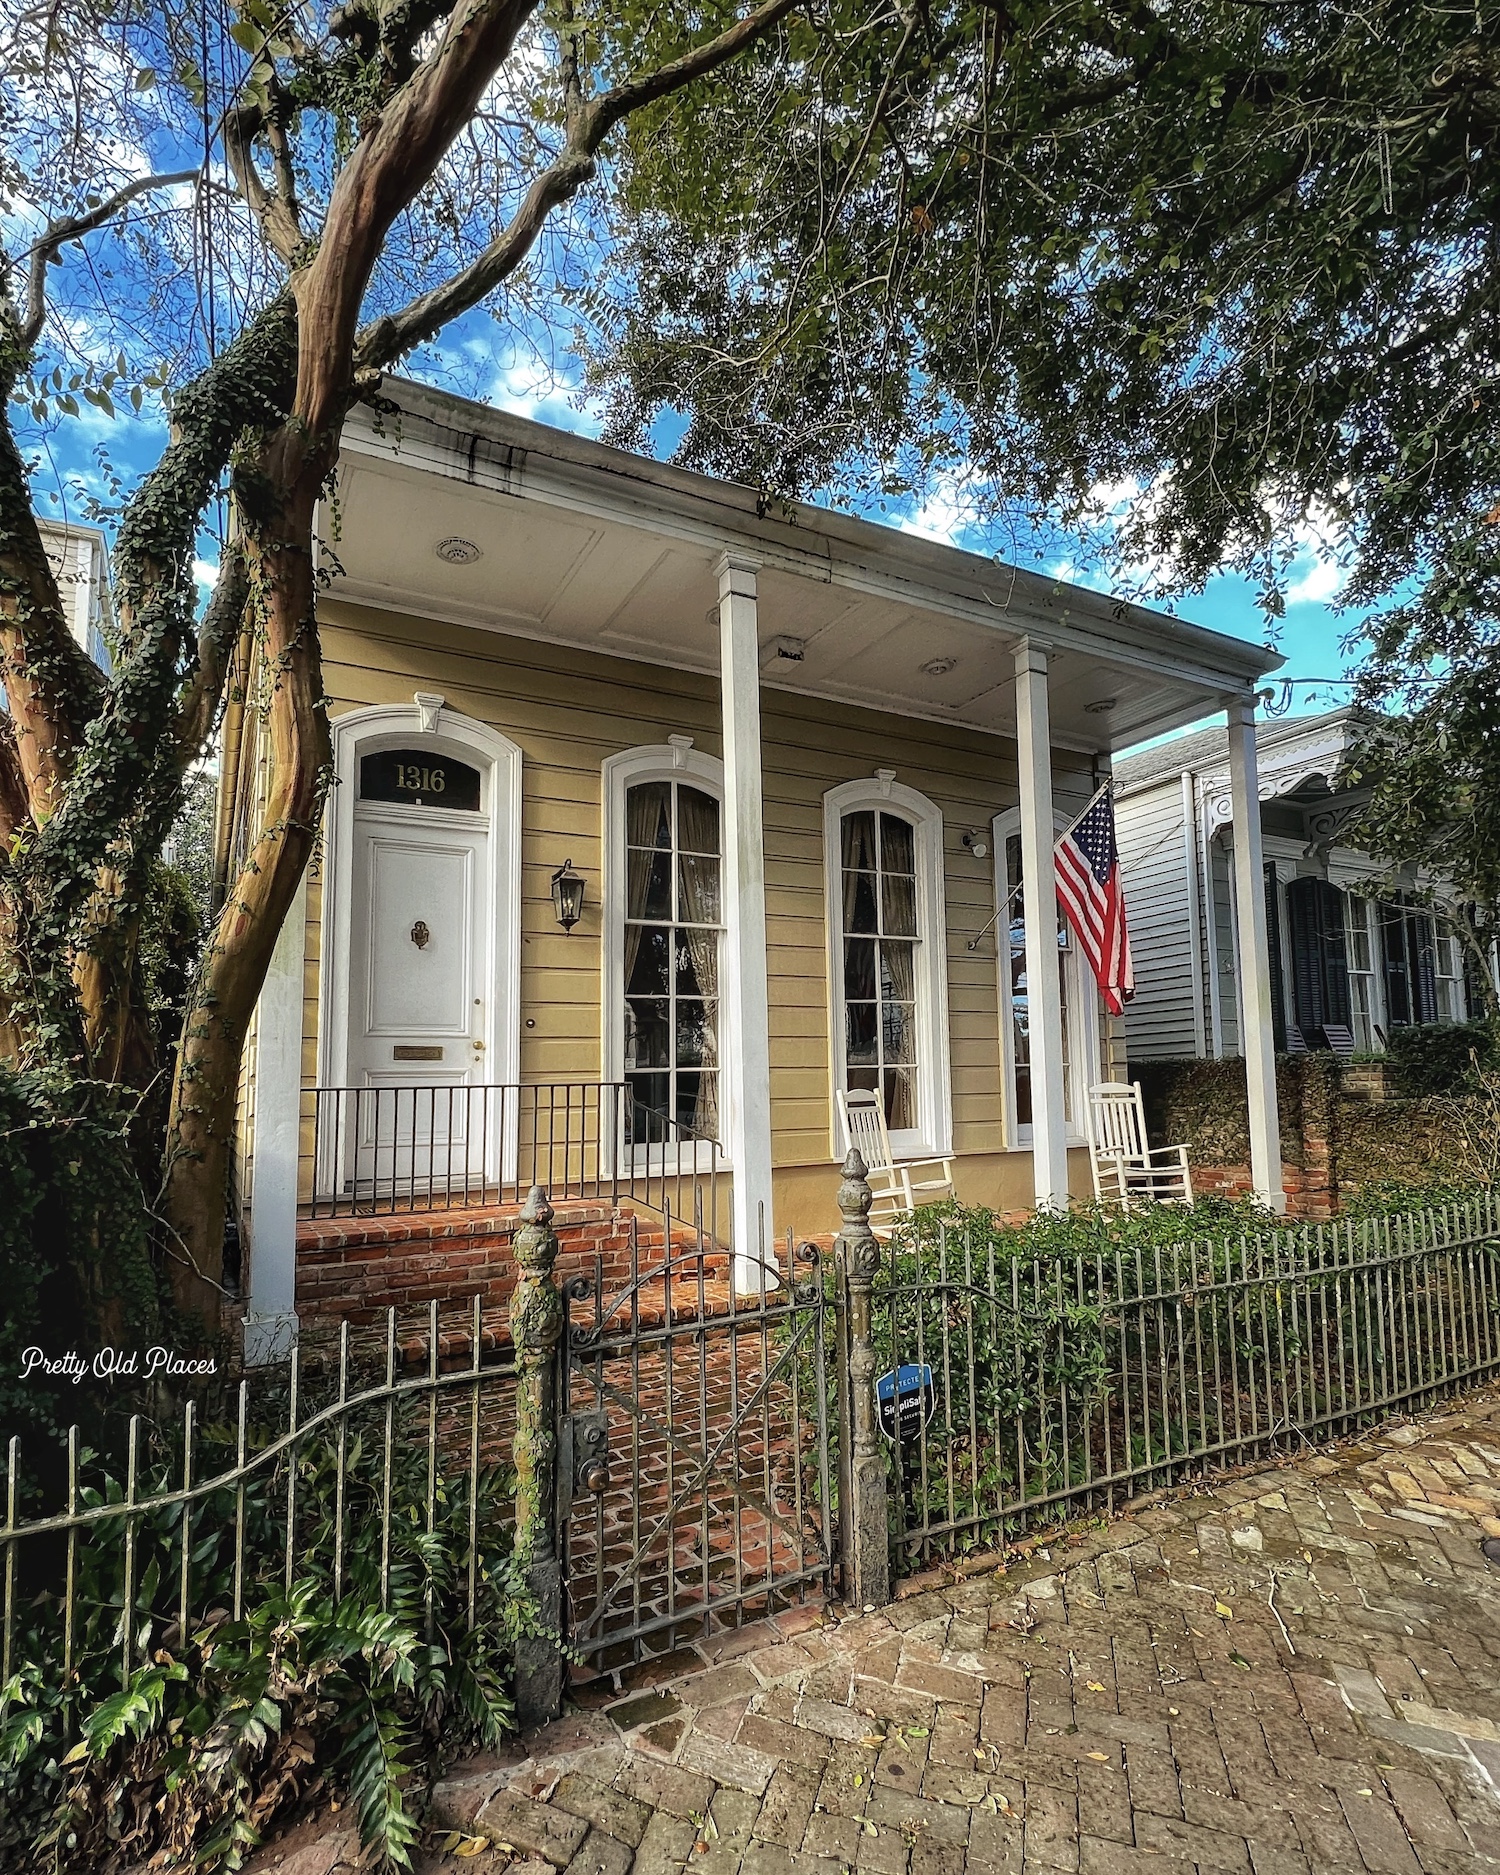 Historic Nola Home Once Belonged to Archie Manning